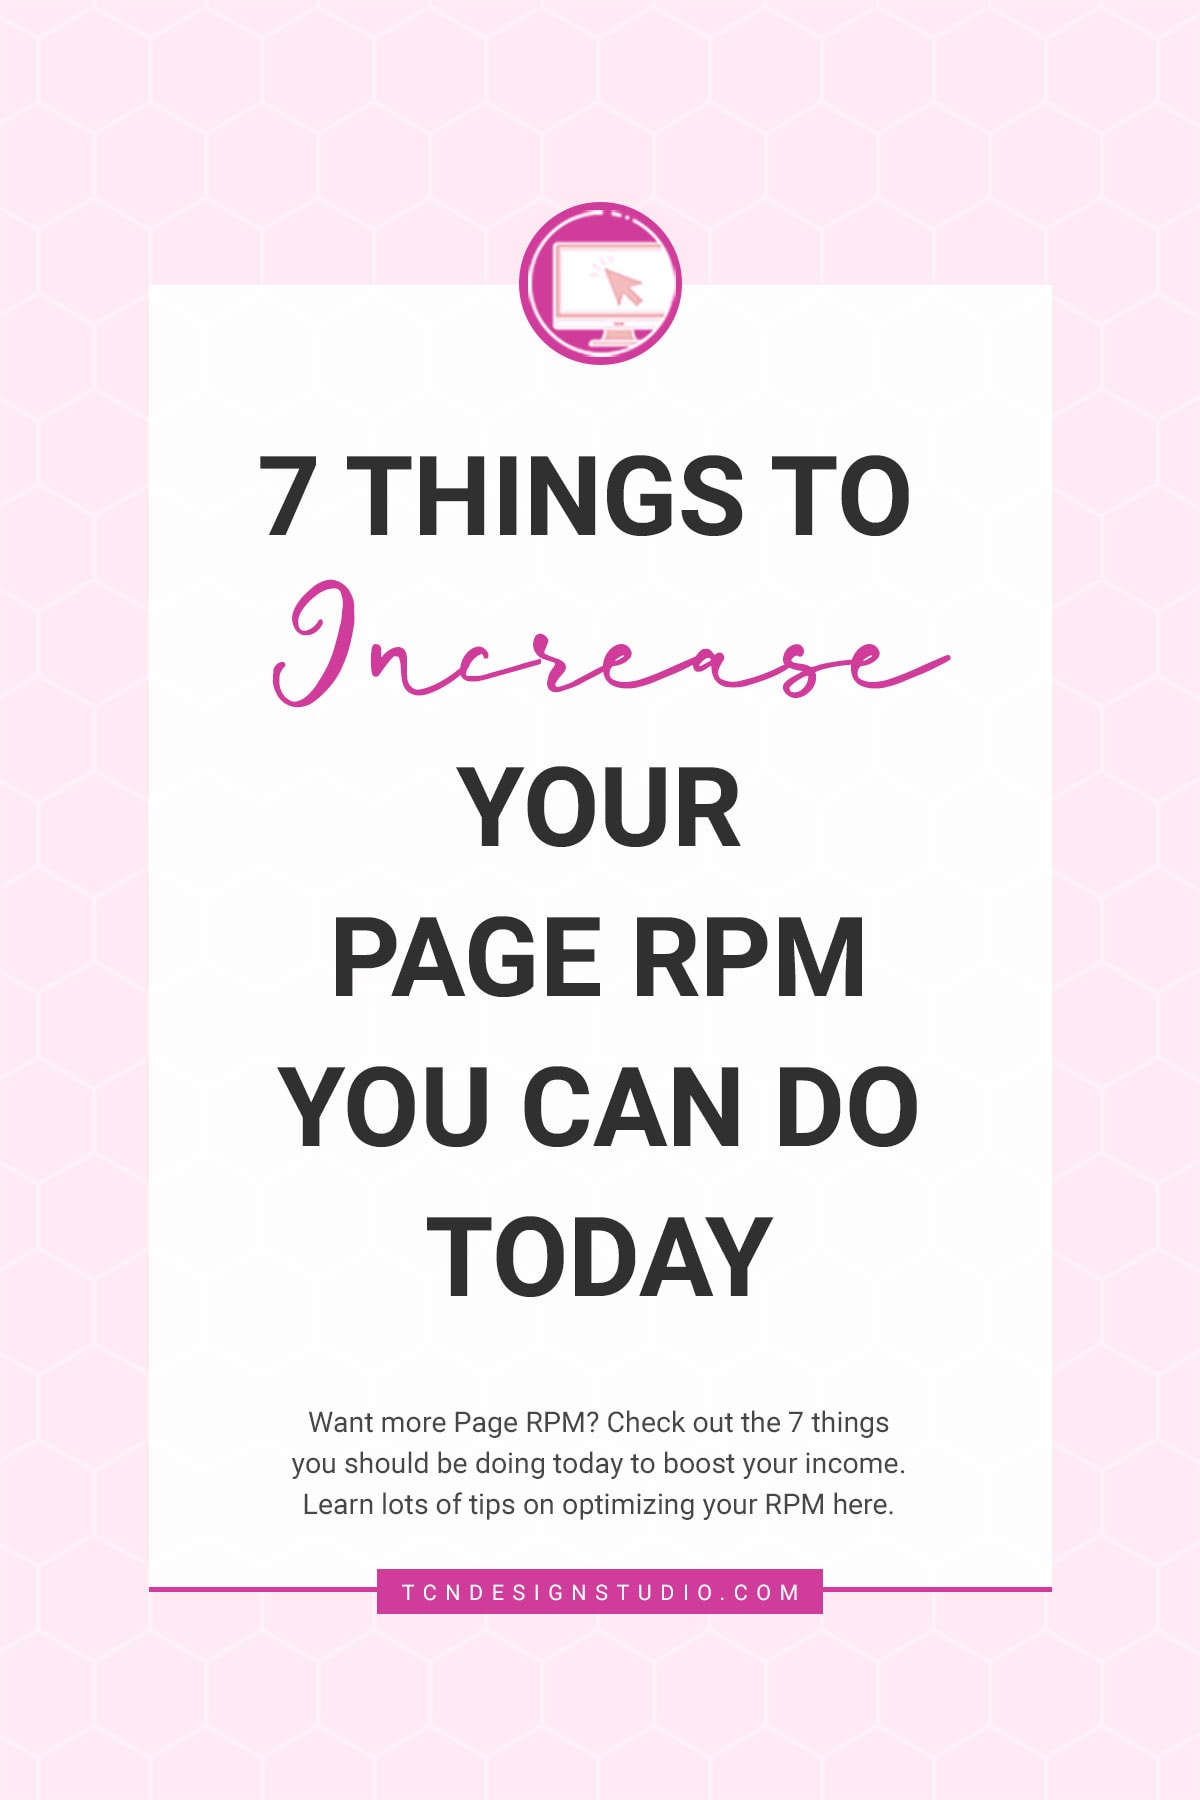 7 Things to increase your Page RPM You can do today